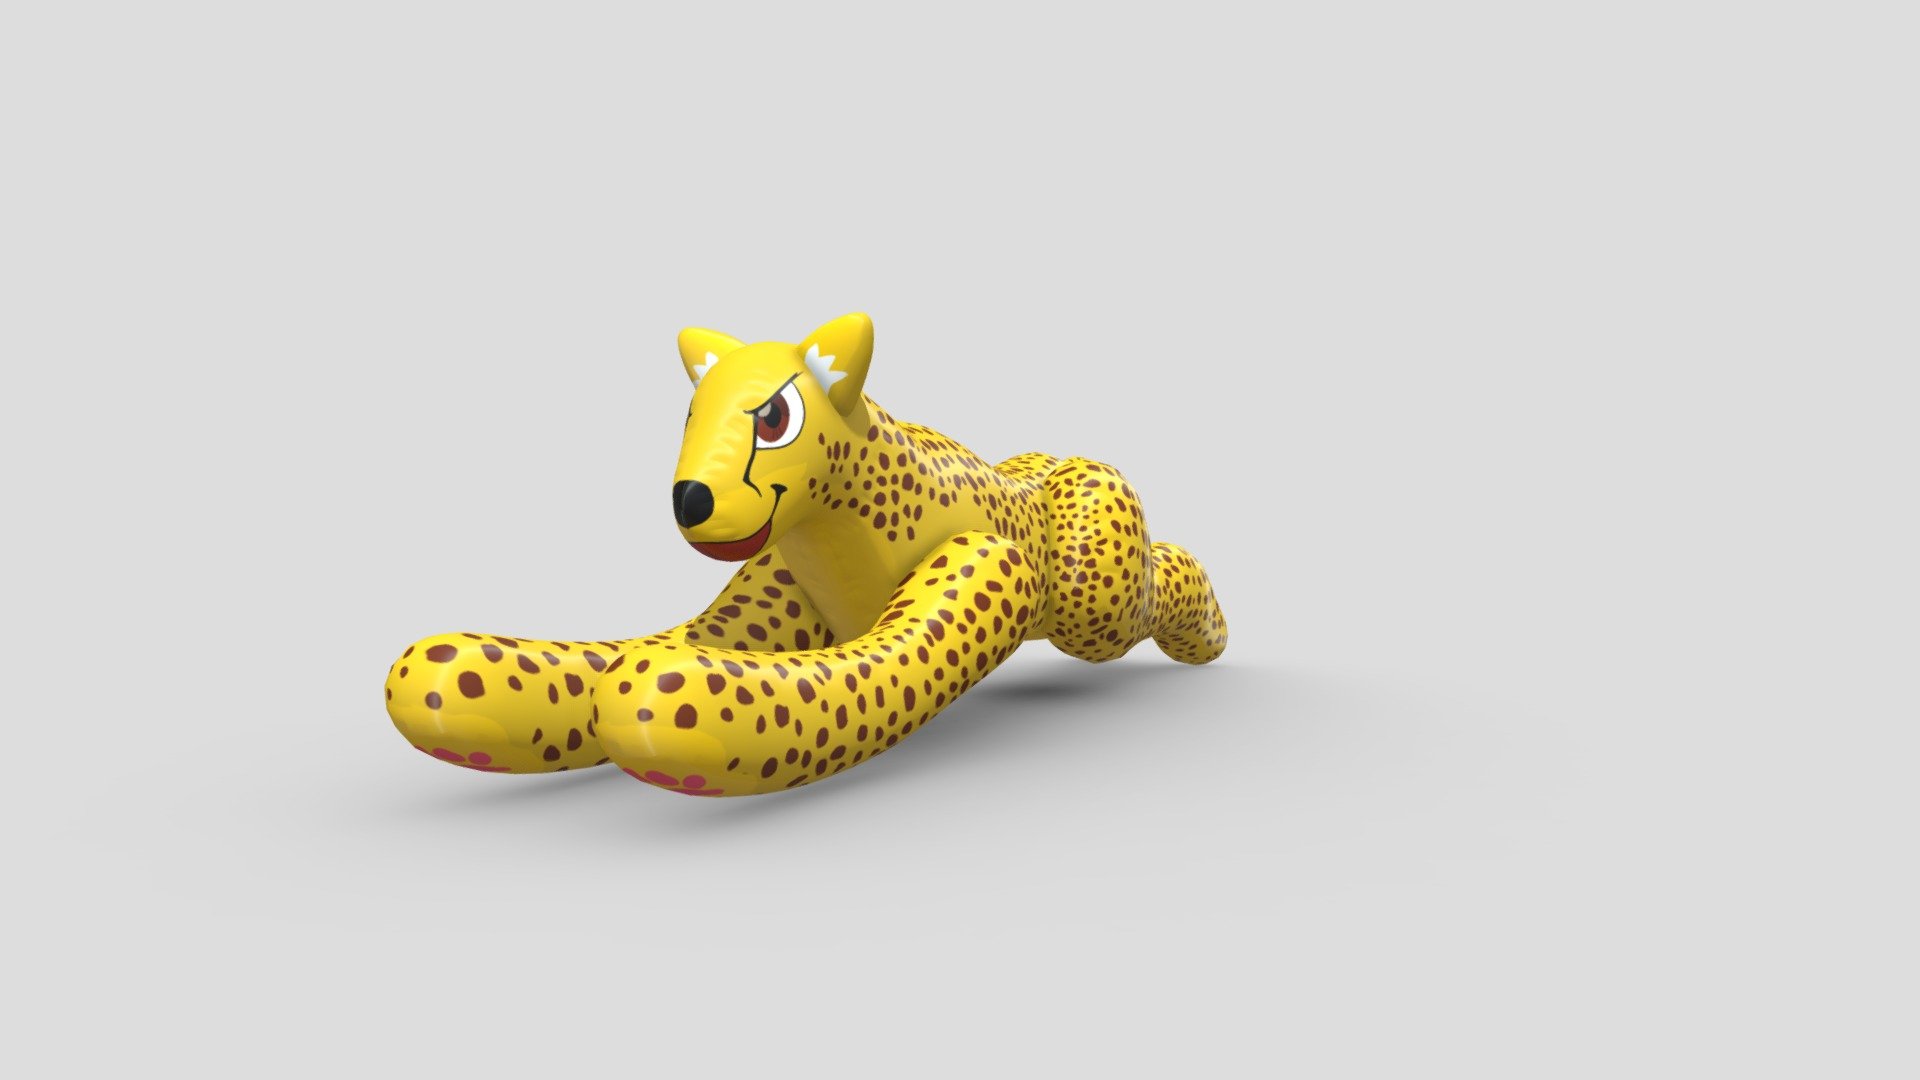 Inflatable cheetah by http://www.inflatableworld-wsp.de/
Model by: FullForceUral - Inflatable IW Cheetah - Download Free 3D model by fullforceural 3d model